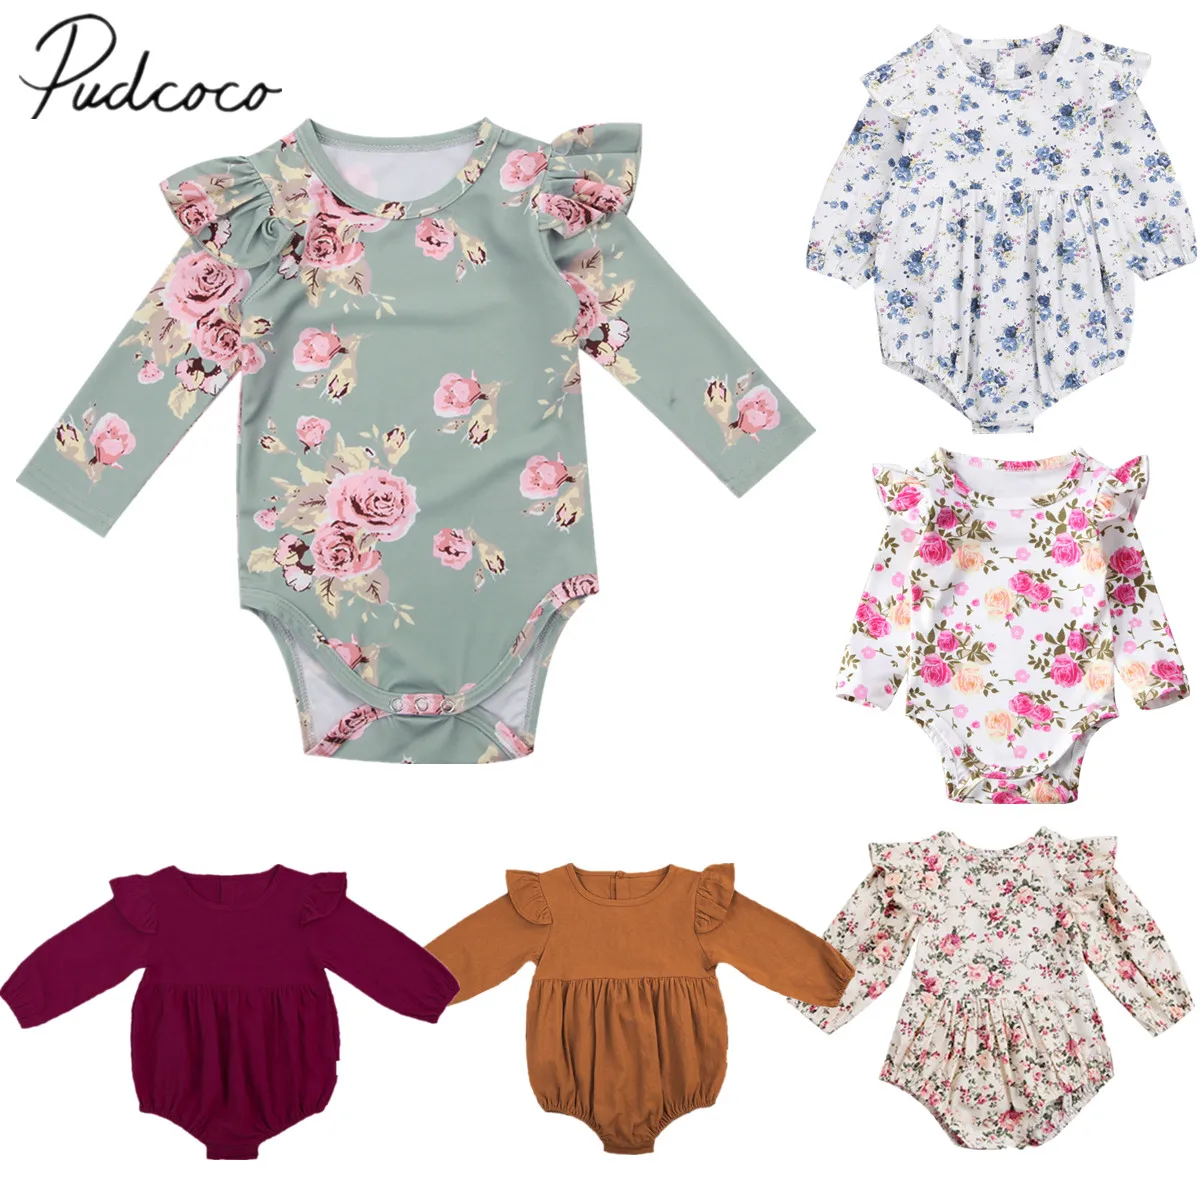 

2018 Brand New Toddler Infant Newborn Baby Girls Kids Long Butterfly Sleeve Romper Outfits Playsuit Jumpsuit Floral Clothes 0-3Y